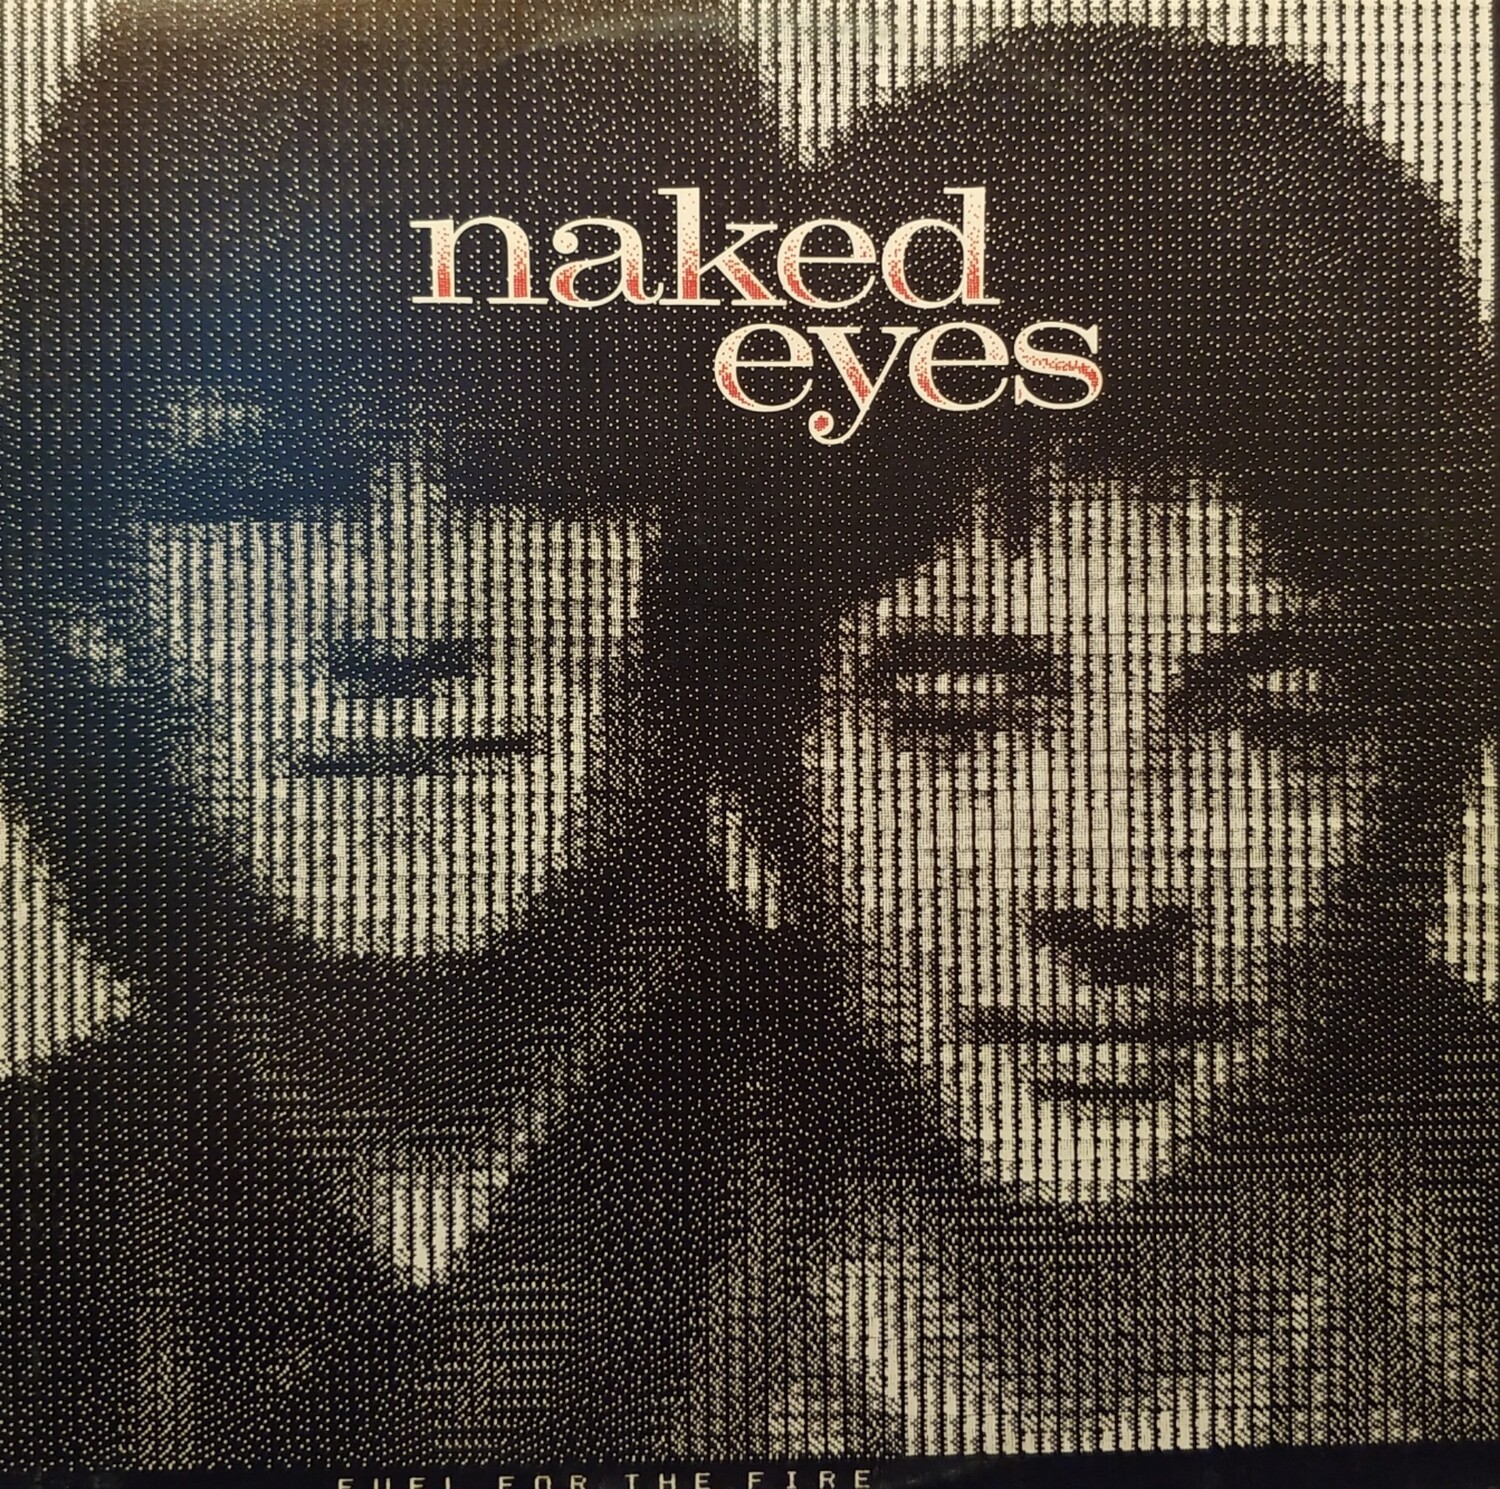 Naked Eyes - Fuel for the fire